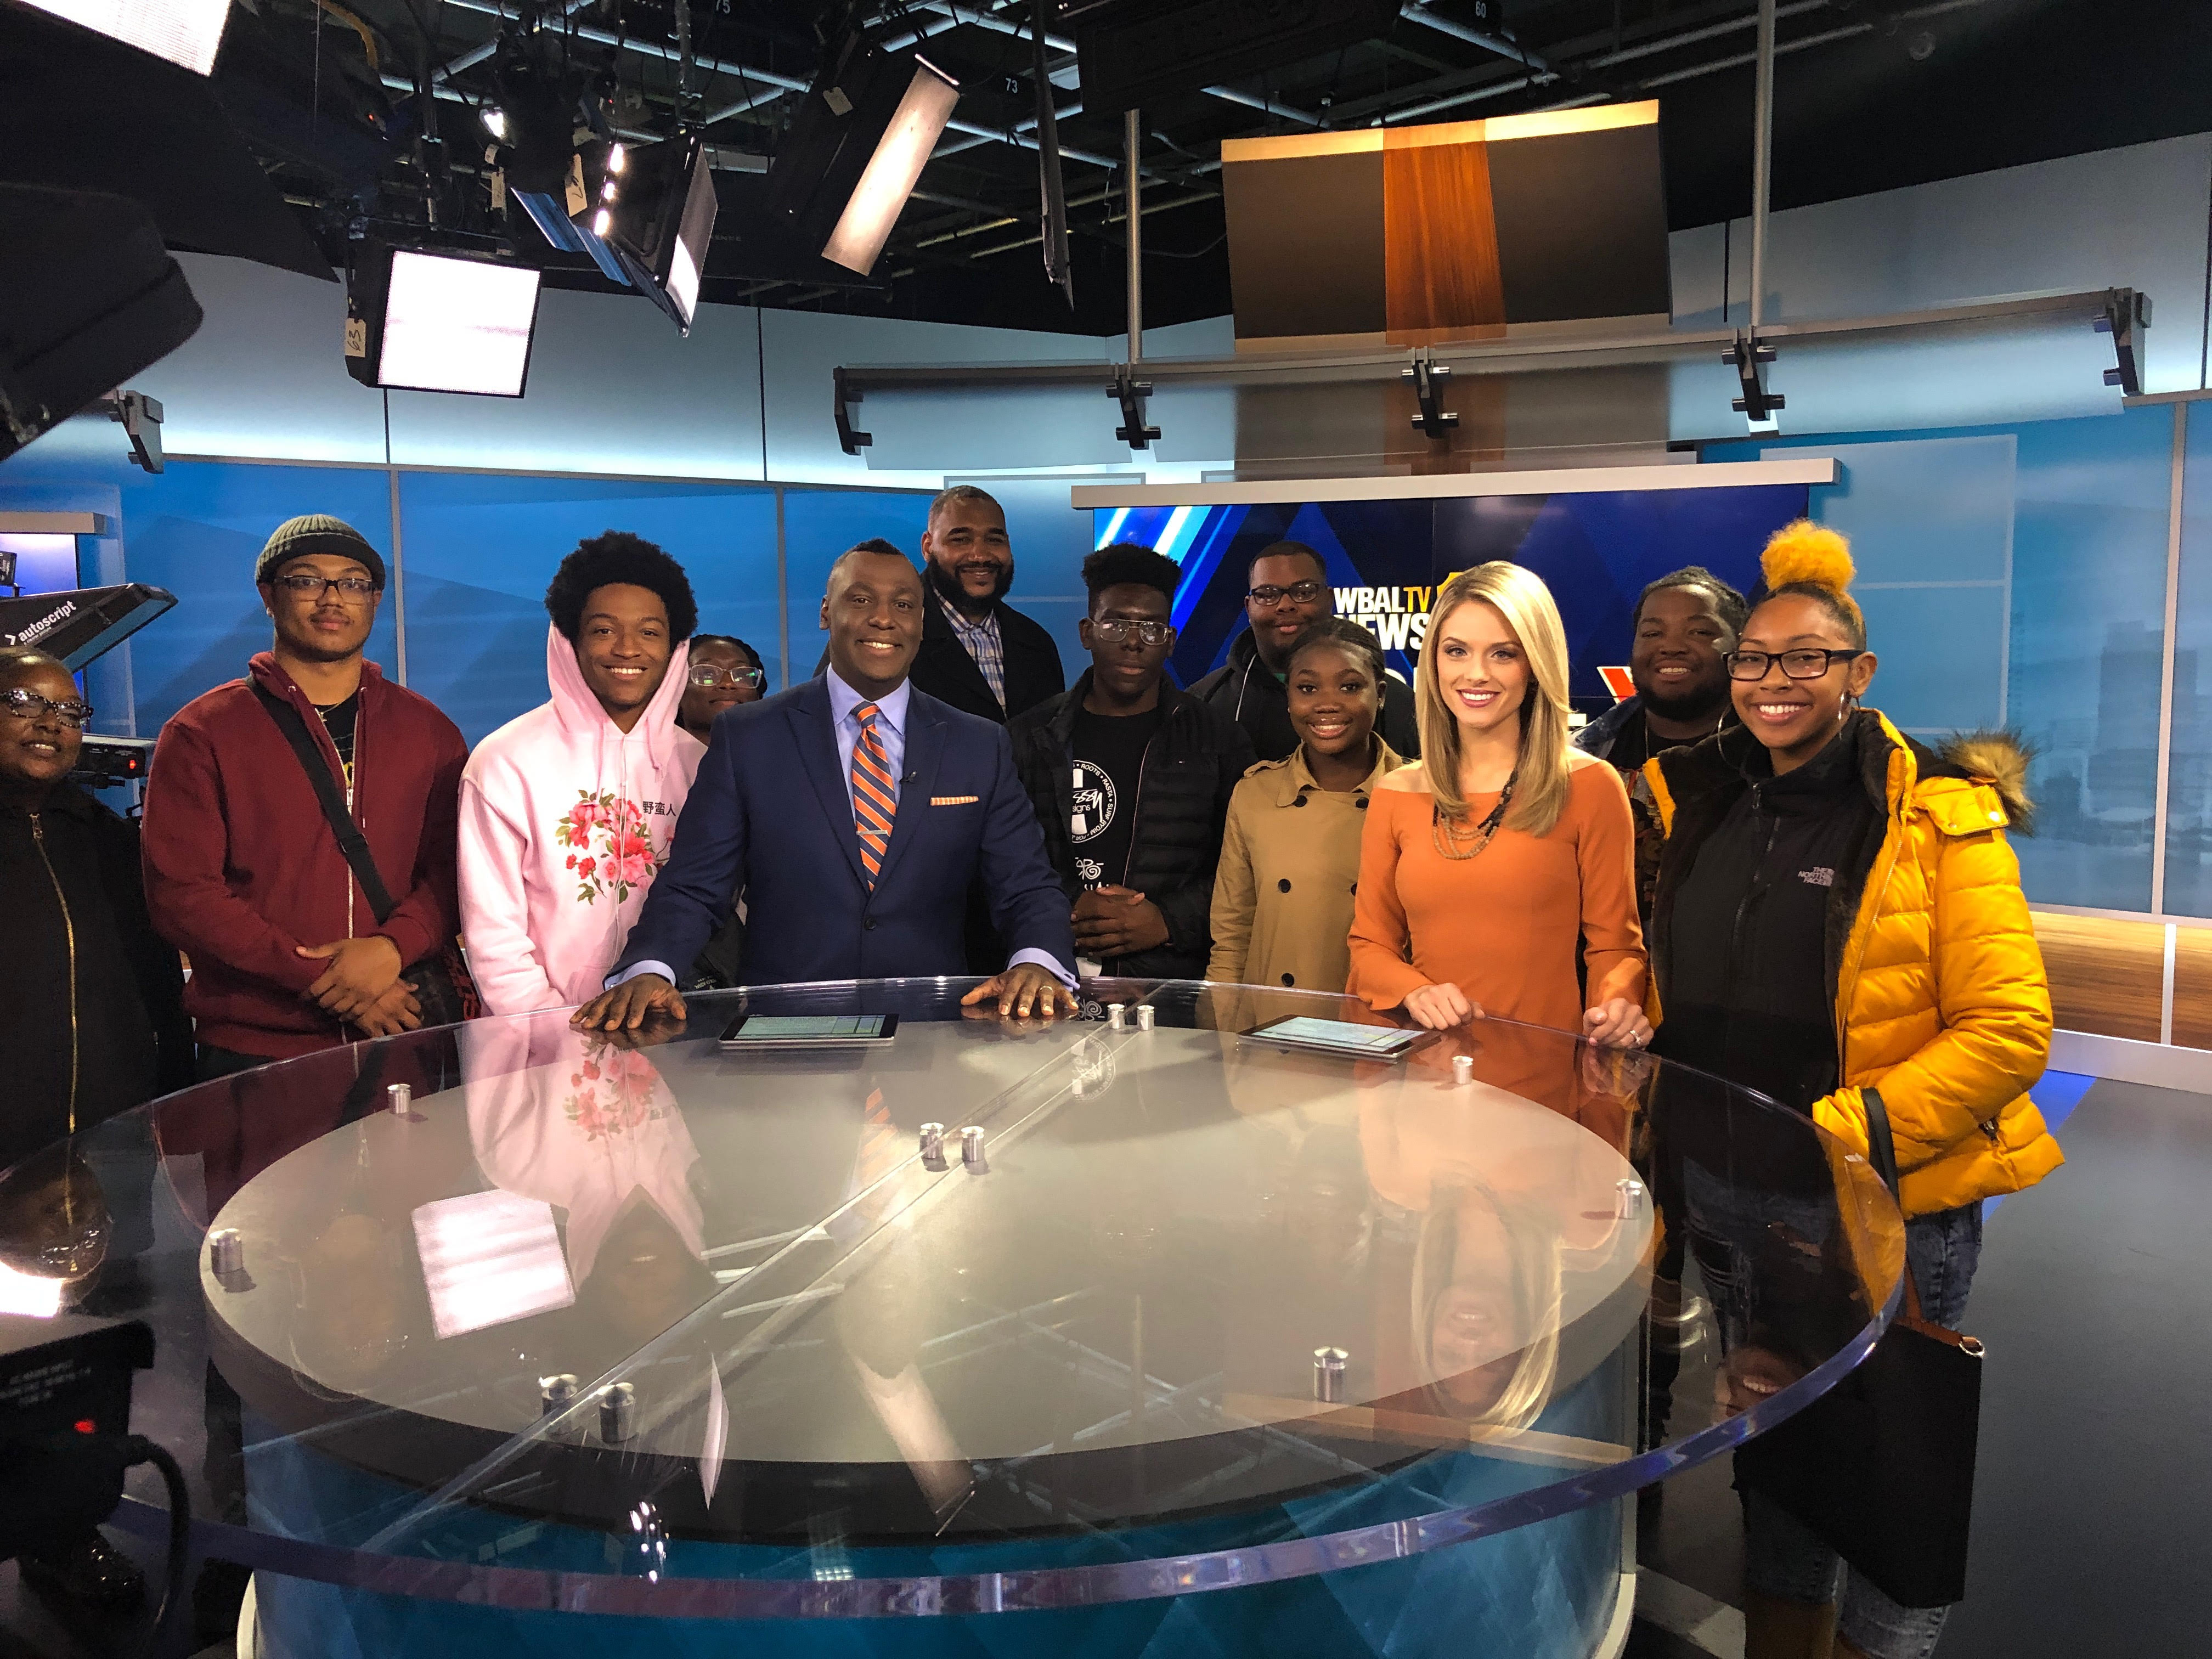 Campus to Career Field Trip to WBAL-TV